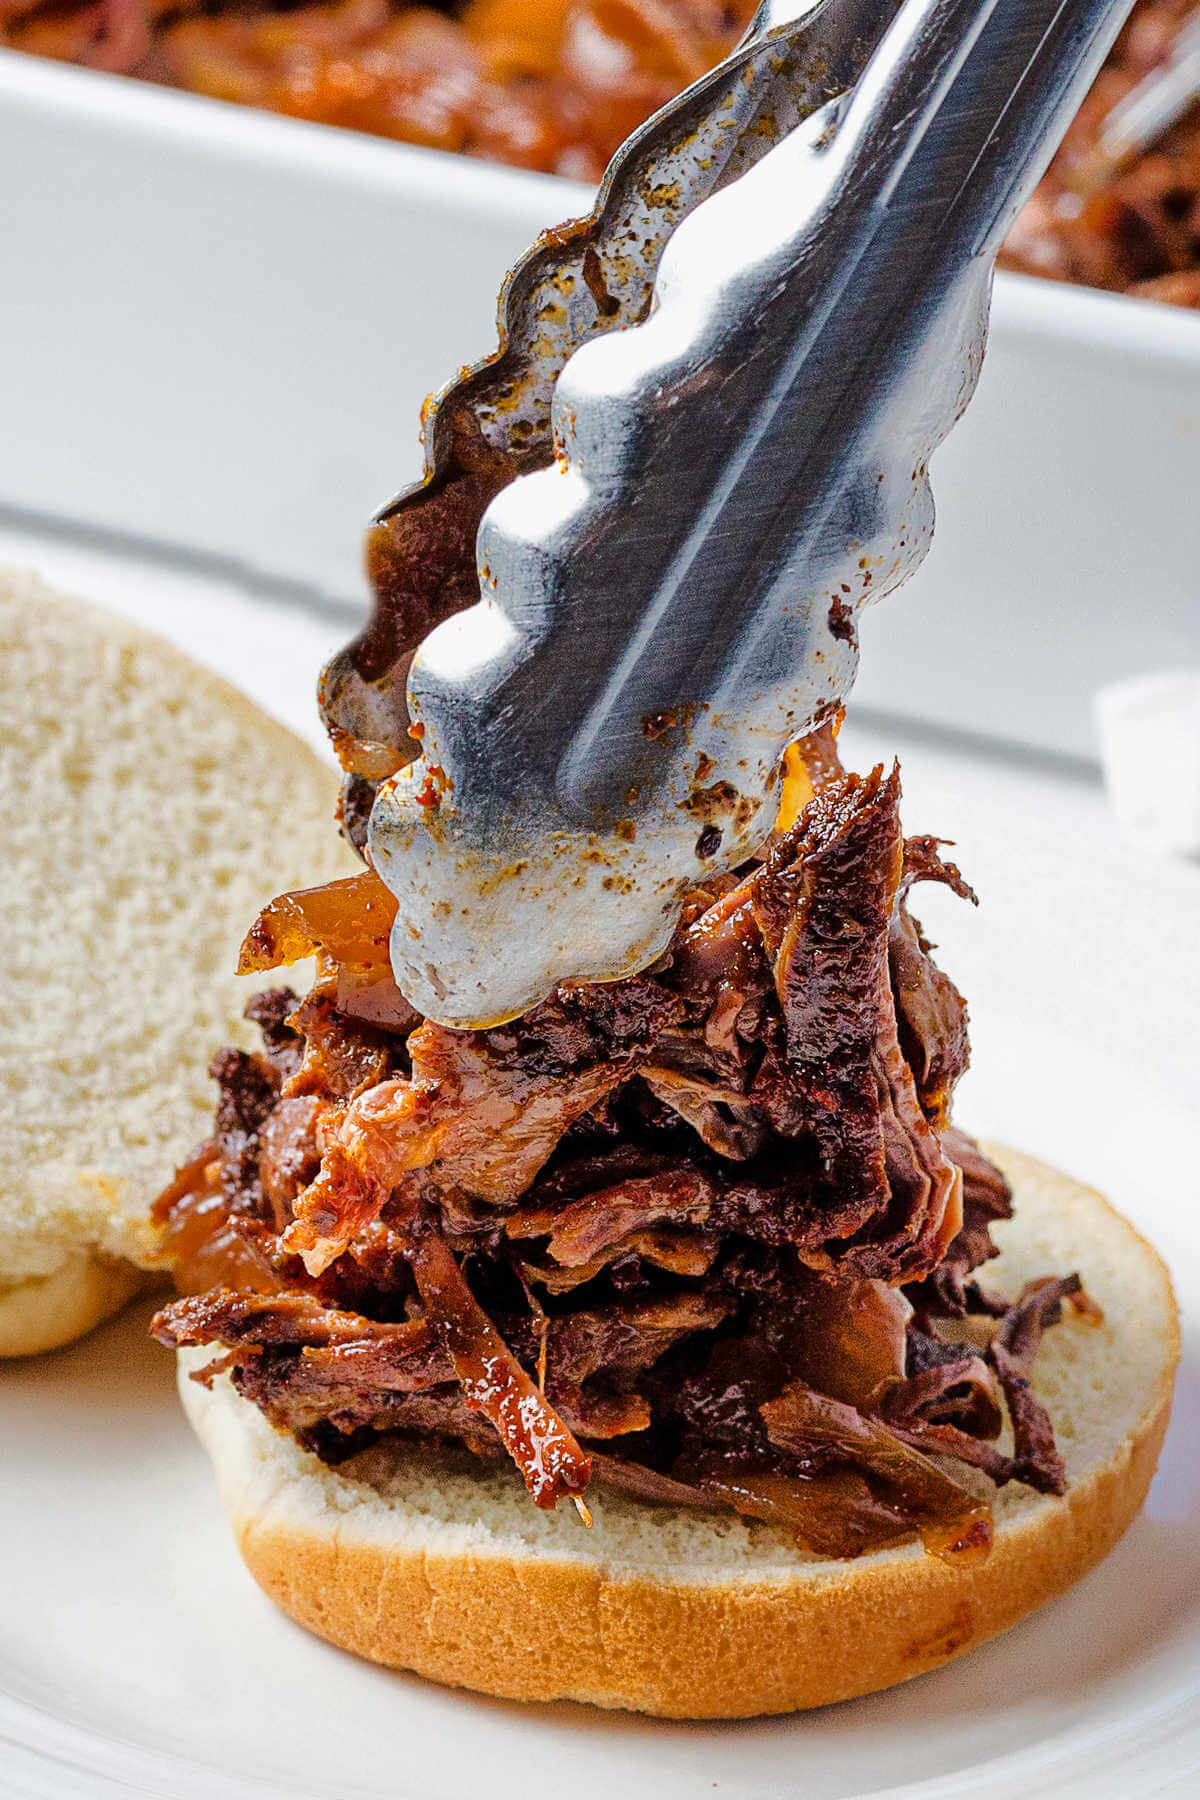 placing shredded beef on a bun with tongs on a plate.